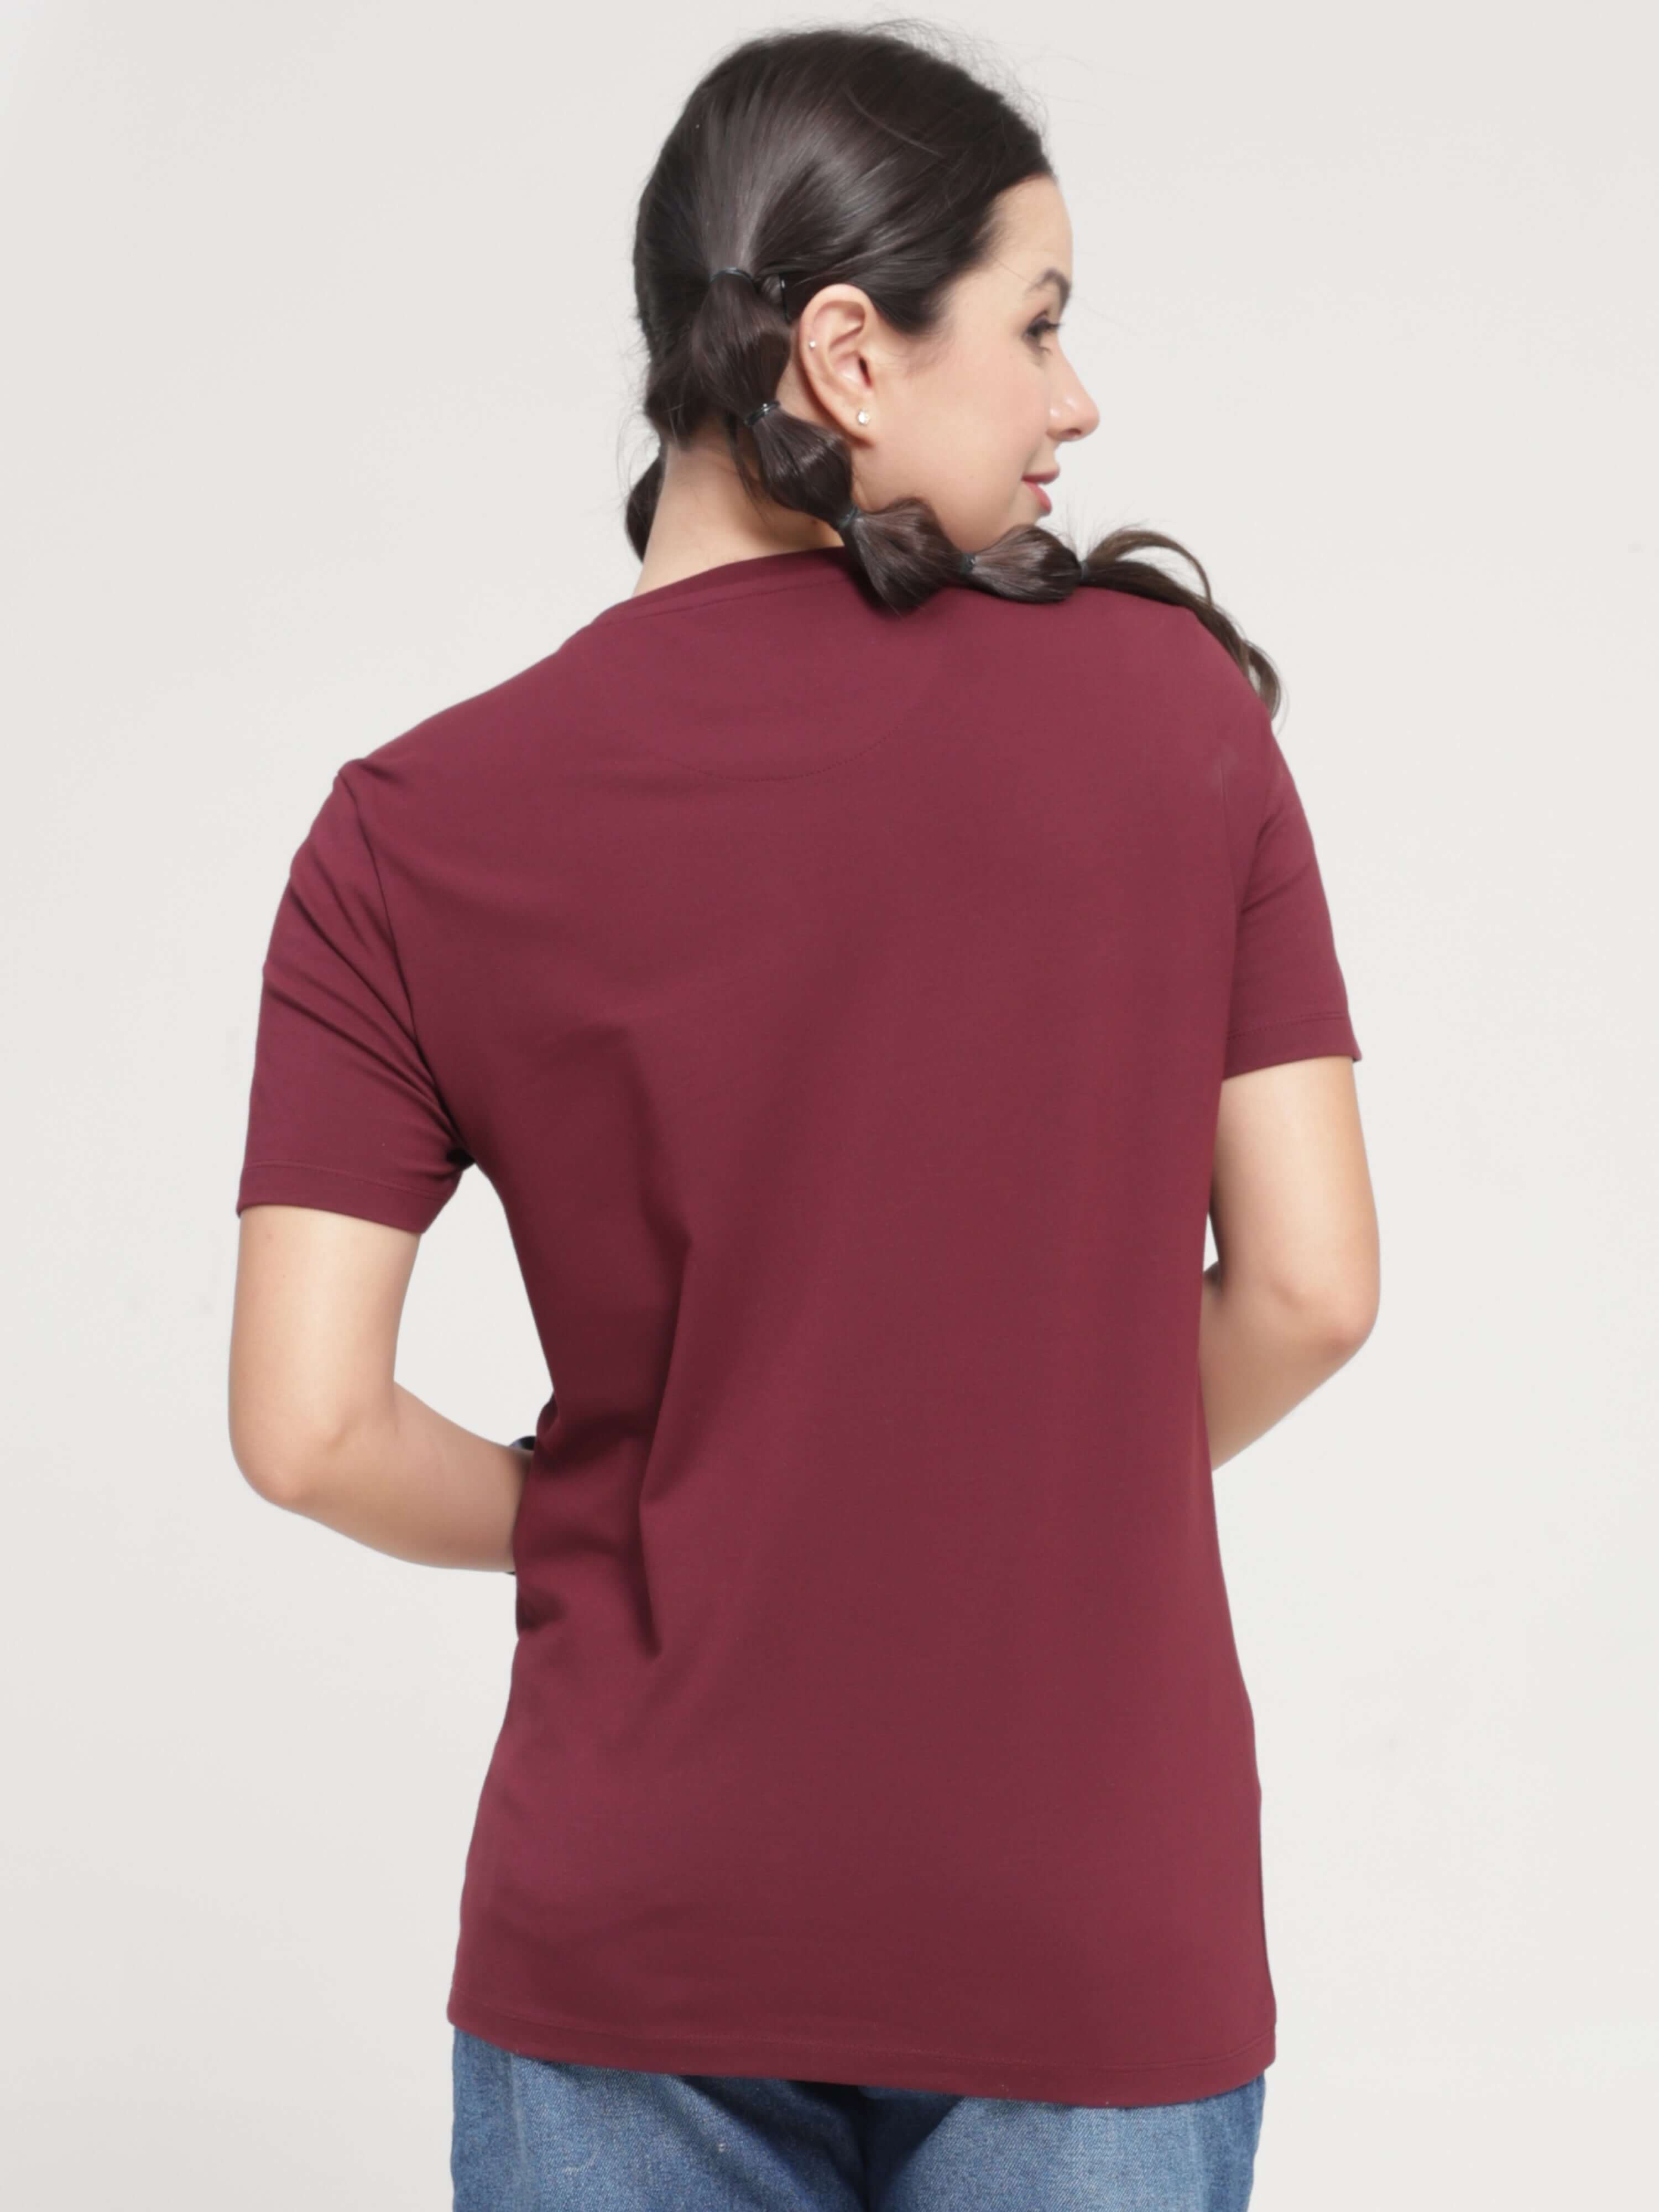 Woman wearing a burgundy round-neck Turms T-shirt, anti-stain and anti-odor stretchable fabric, tailored fit, back view.